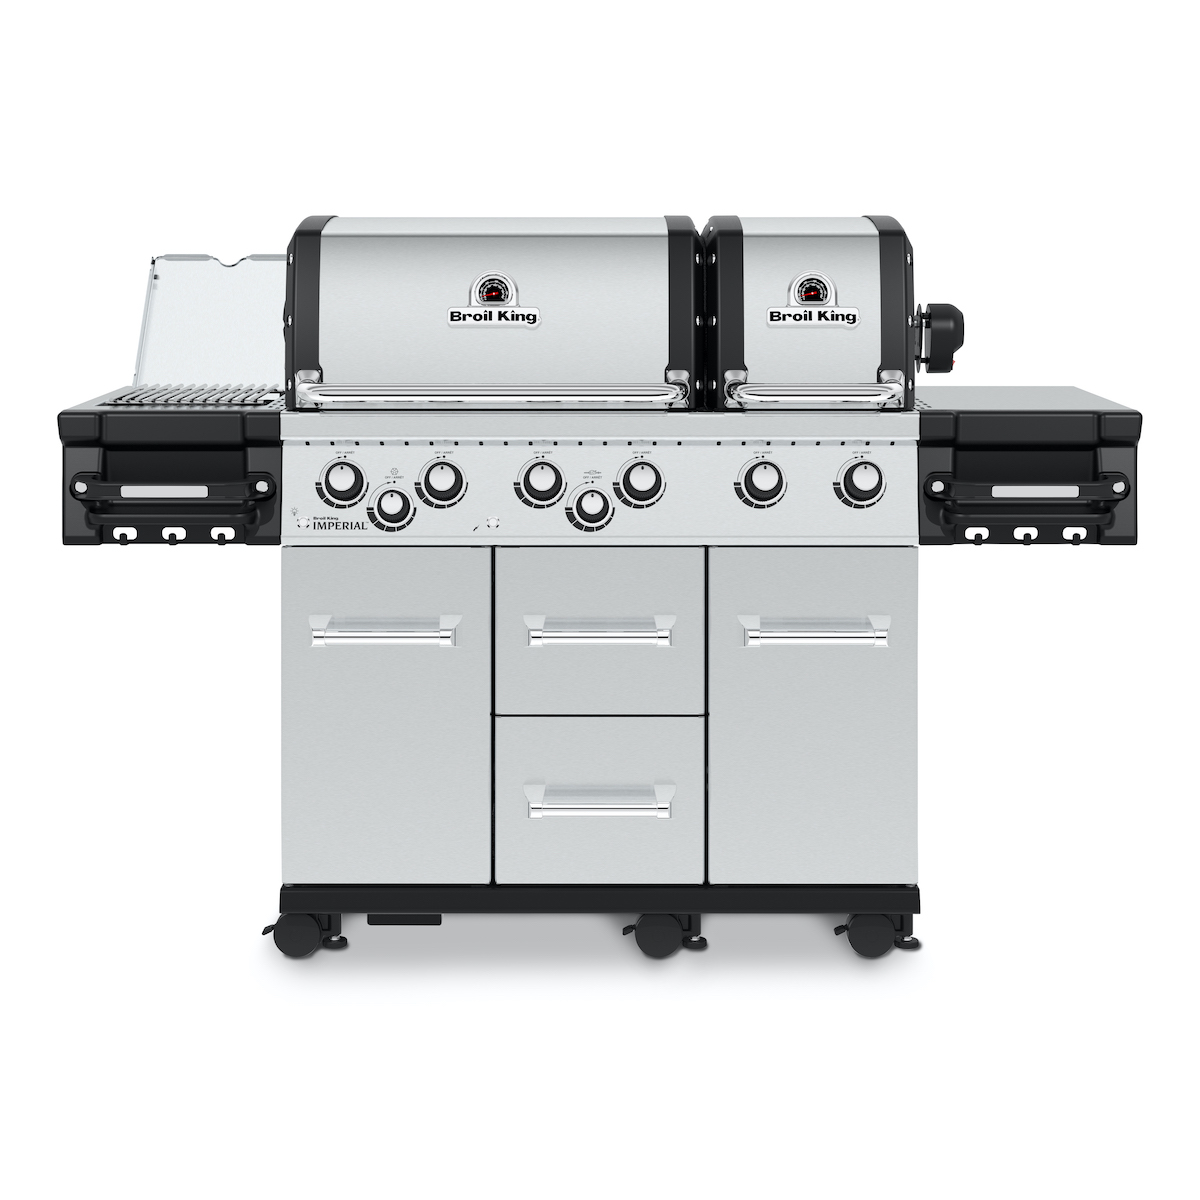 BROIL KING IMPERIAL S 690 Pro IR Gasgrill 